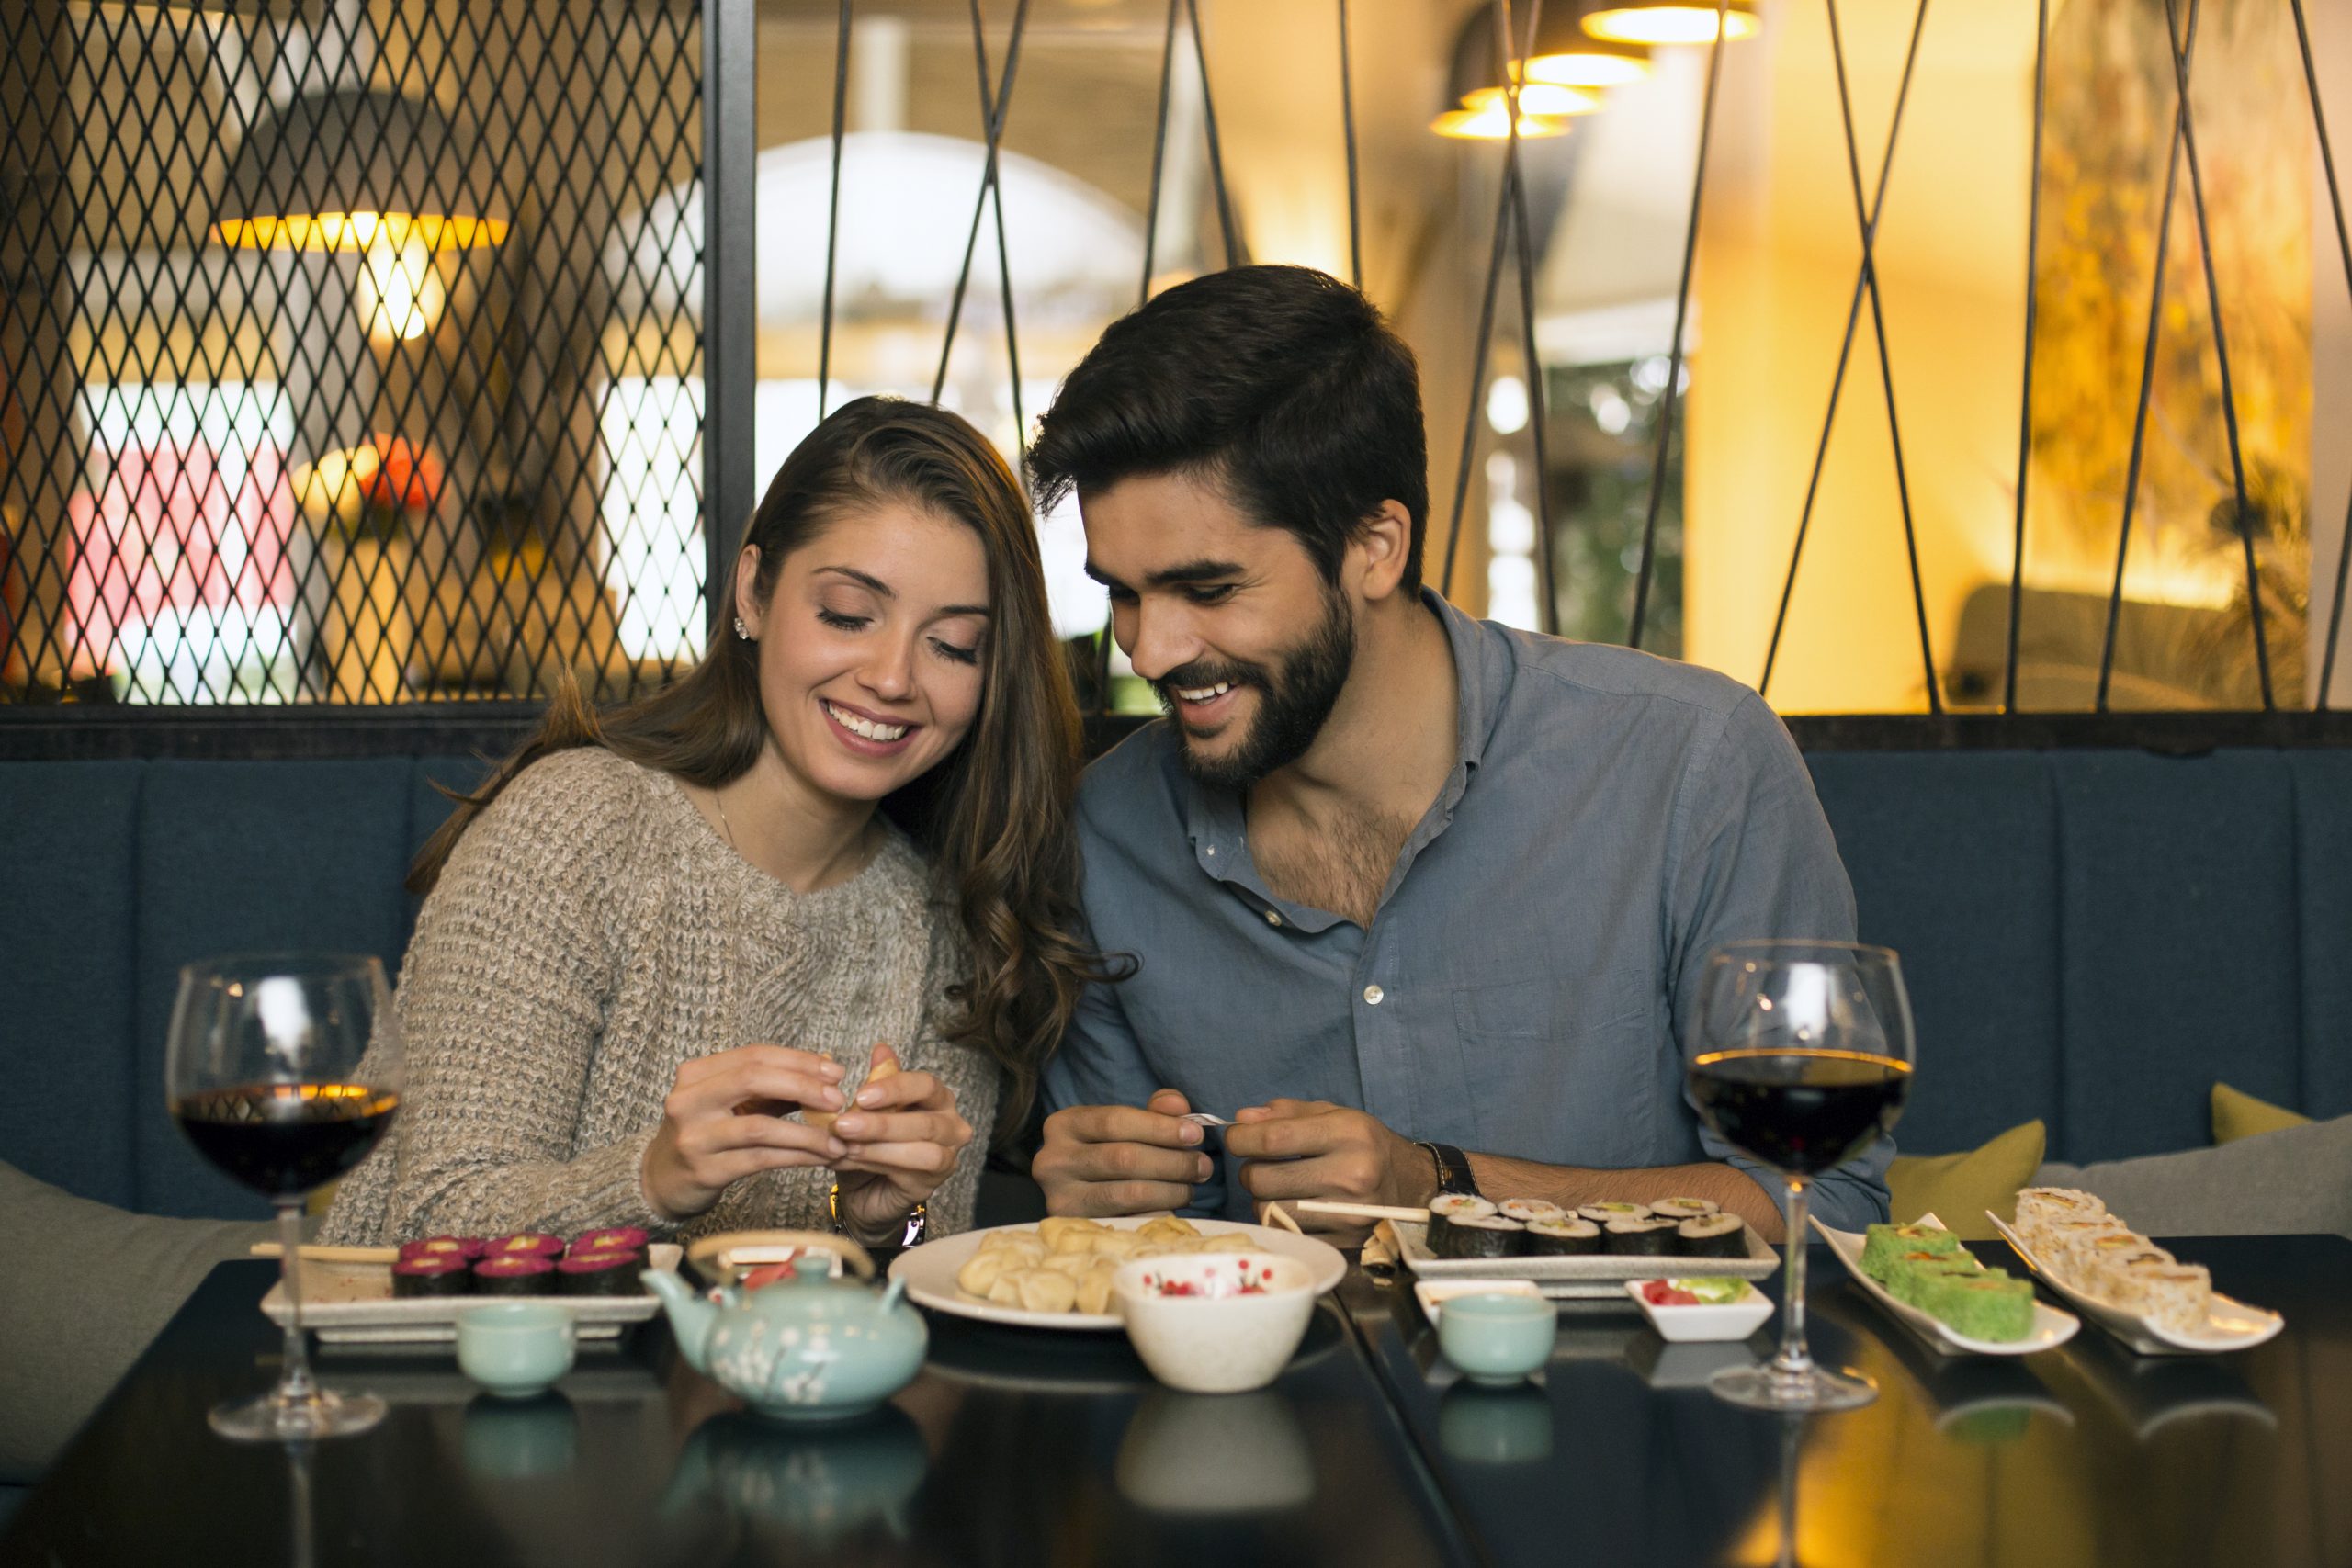 On A Dinner Or Coffee Date, Is It Better To Face Each Other While Sitting Or Sit Next To Each Other?